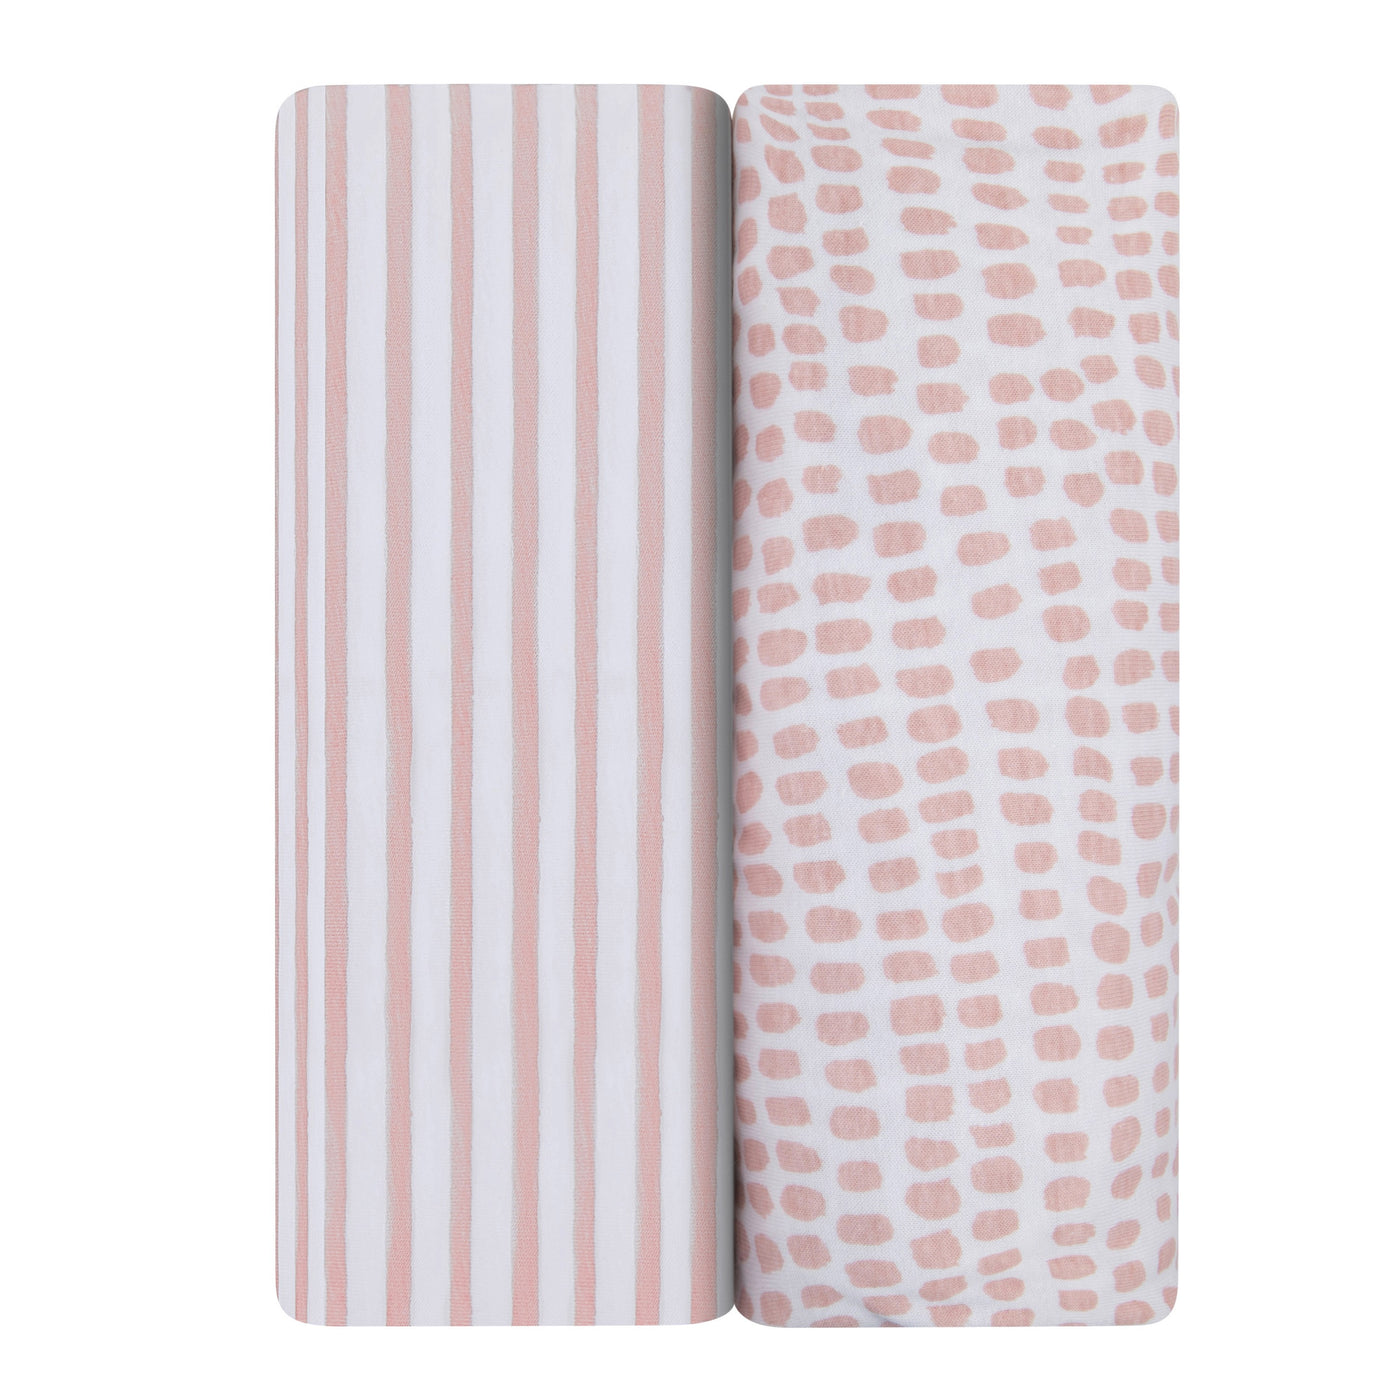 Ely's & Co. Waterproof Two Pack Portable Crib / Pack N Play Sheets - Pink Stripes & Splash Collection